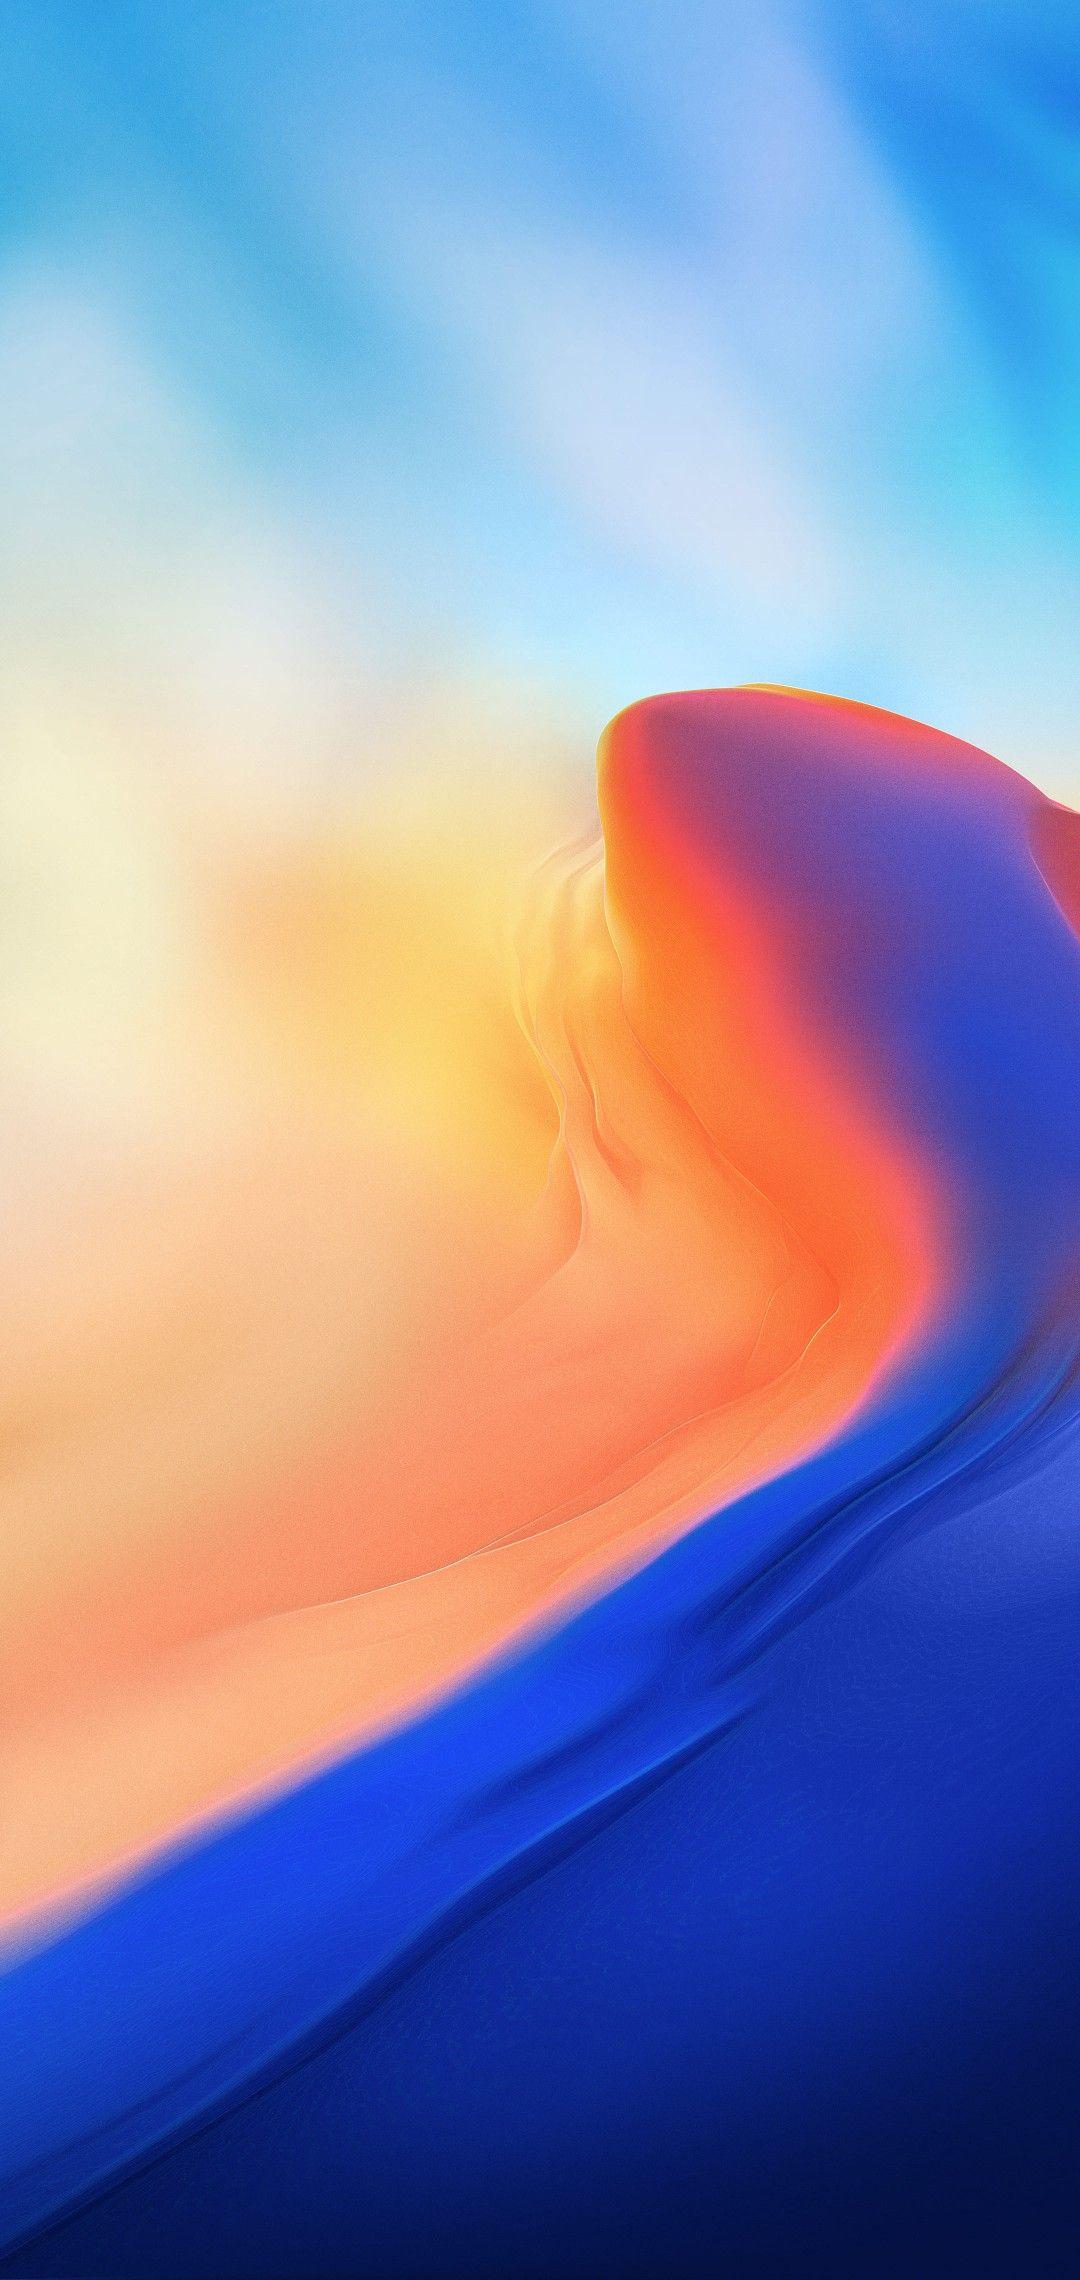 iOS iPhone X, orange, red, blue, clean, simple, abstract, apple, wallpaper, iphone clean, beauty, colo. Apple wallpaper, Stock wallpaper, Macbook wallpaper